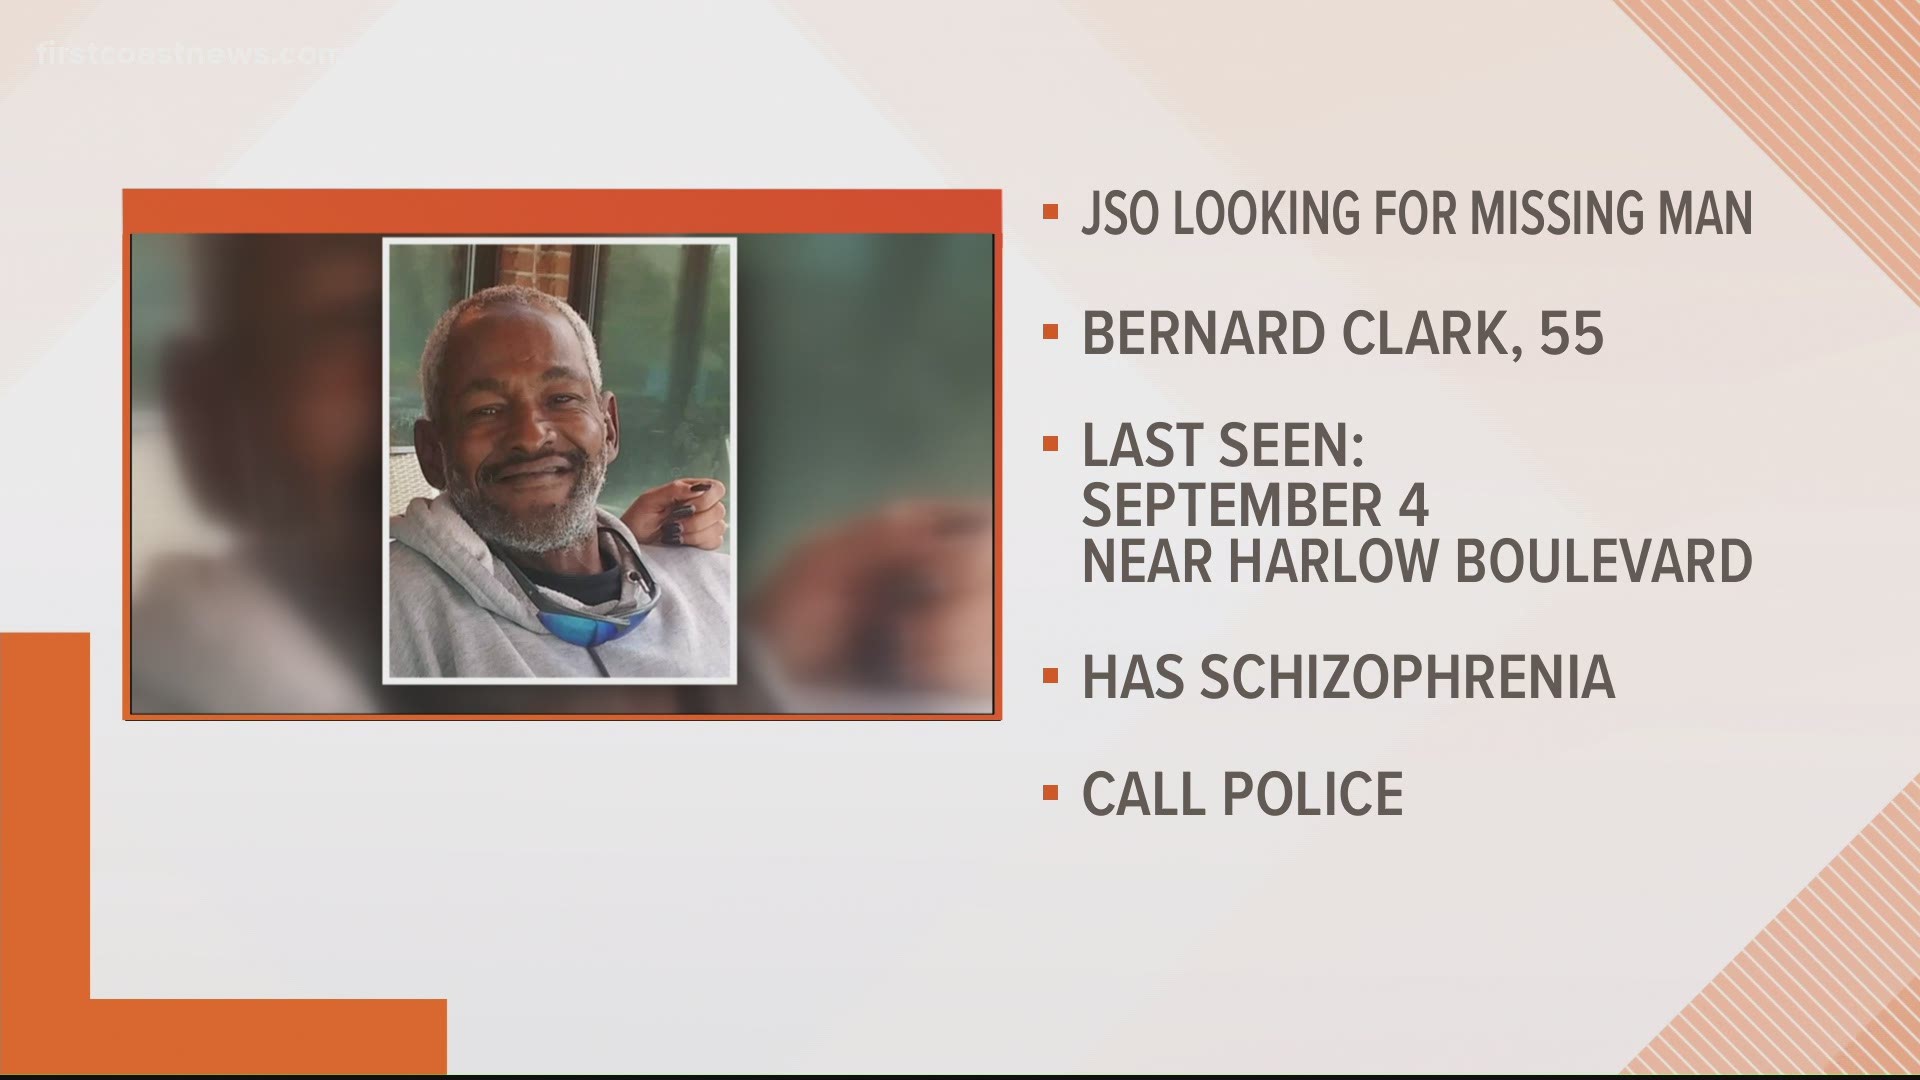 The Jacksonville Sheriff's Office says 55-year-old Bernard "Freddy" Clark was last seen Sept. 4, and police have been unsuccessful finding him.